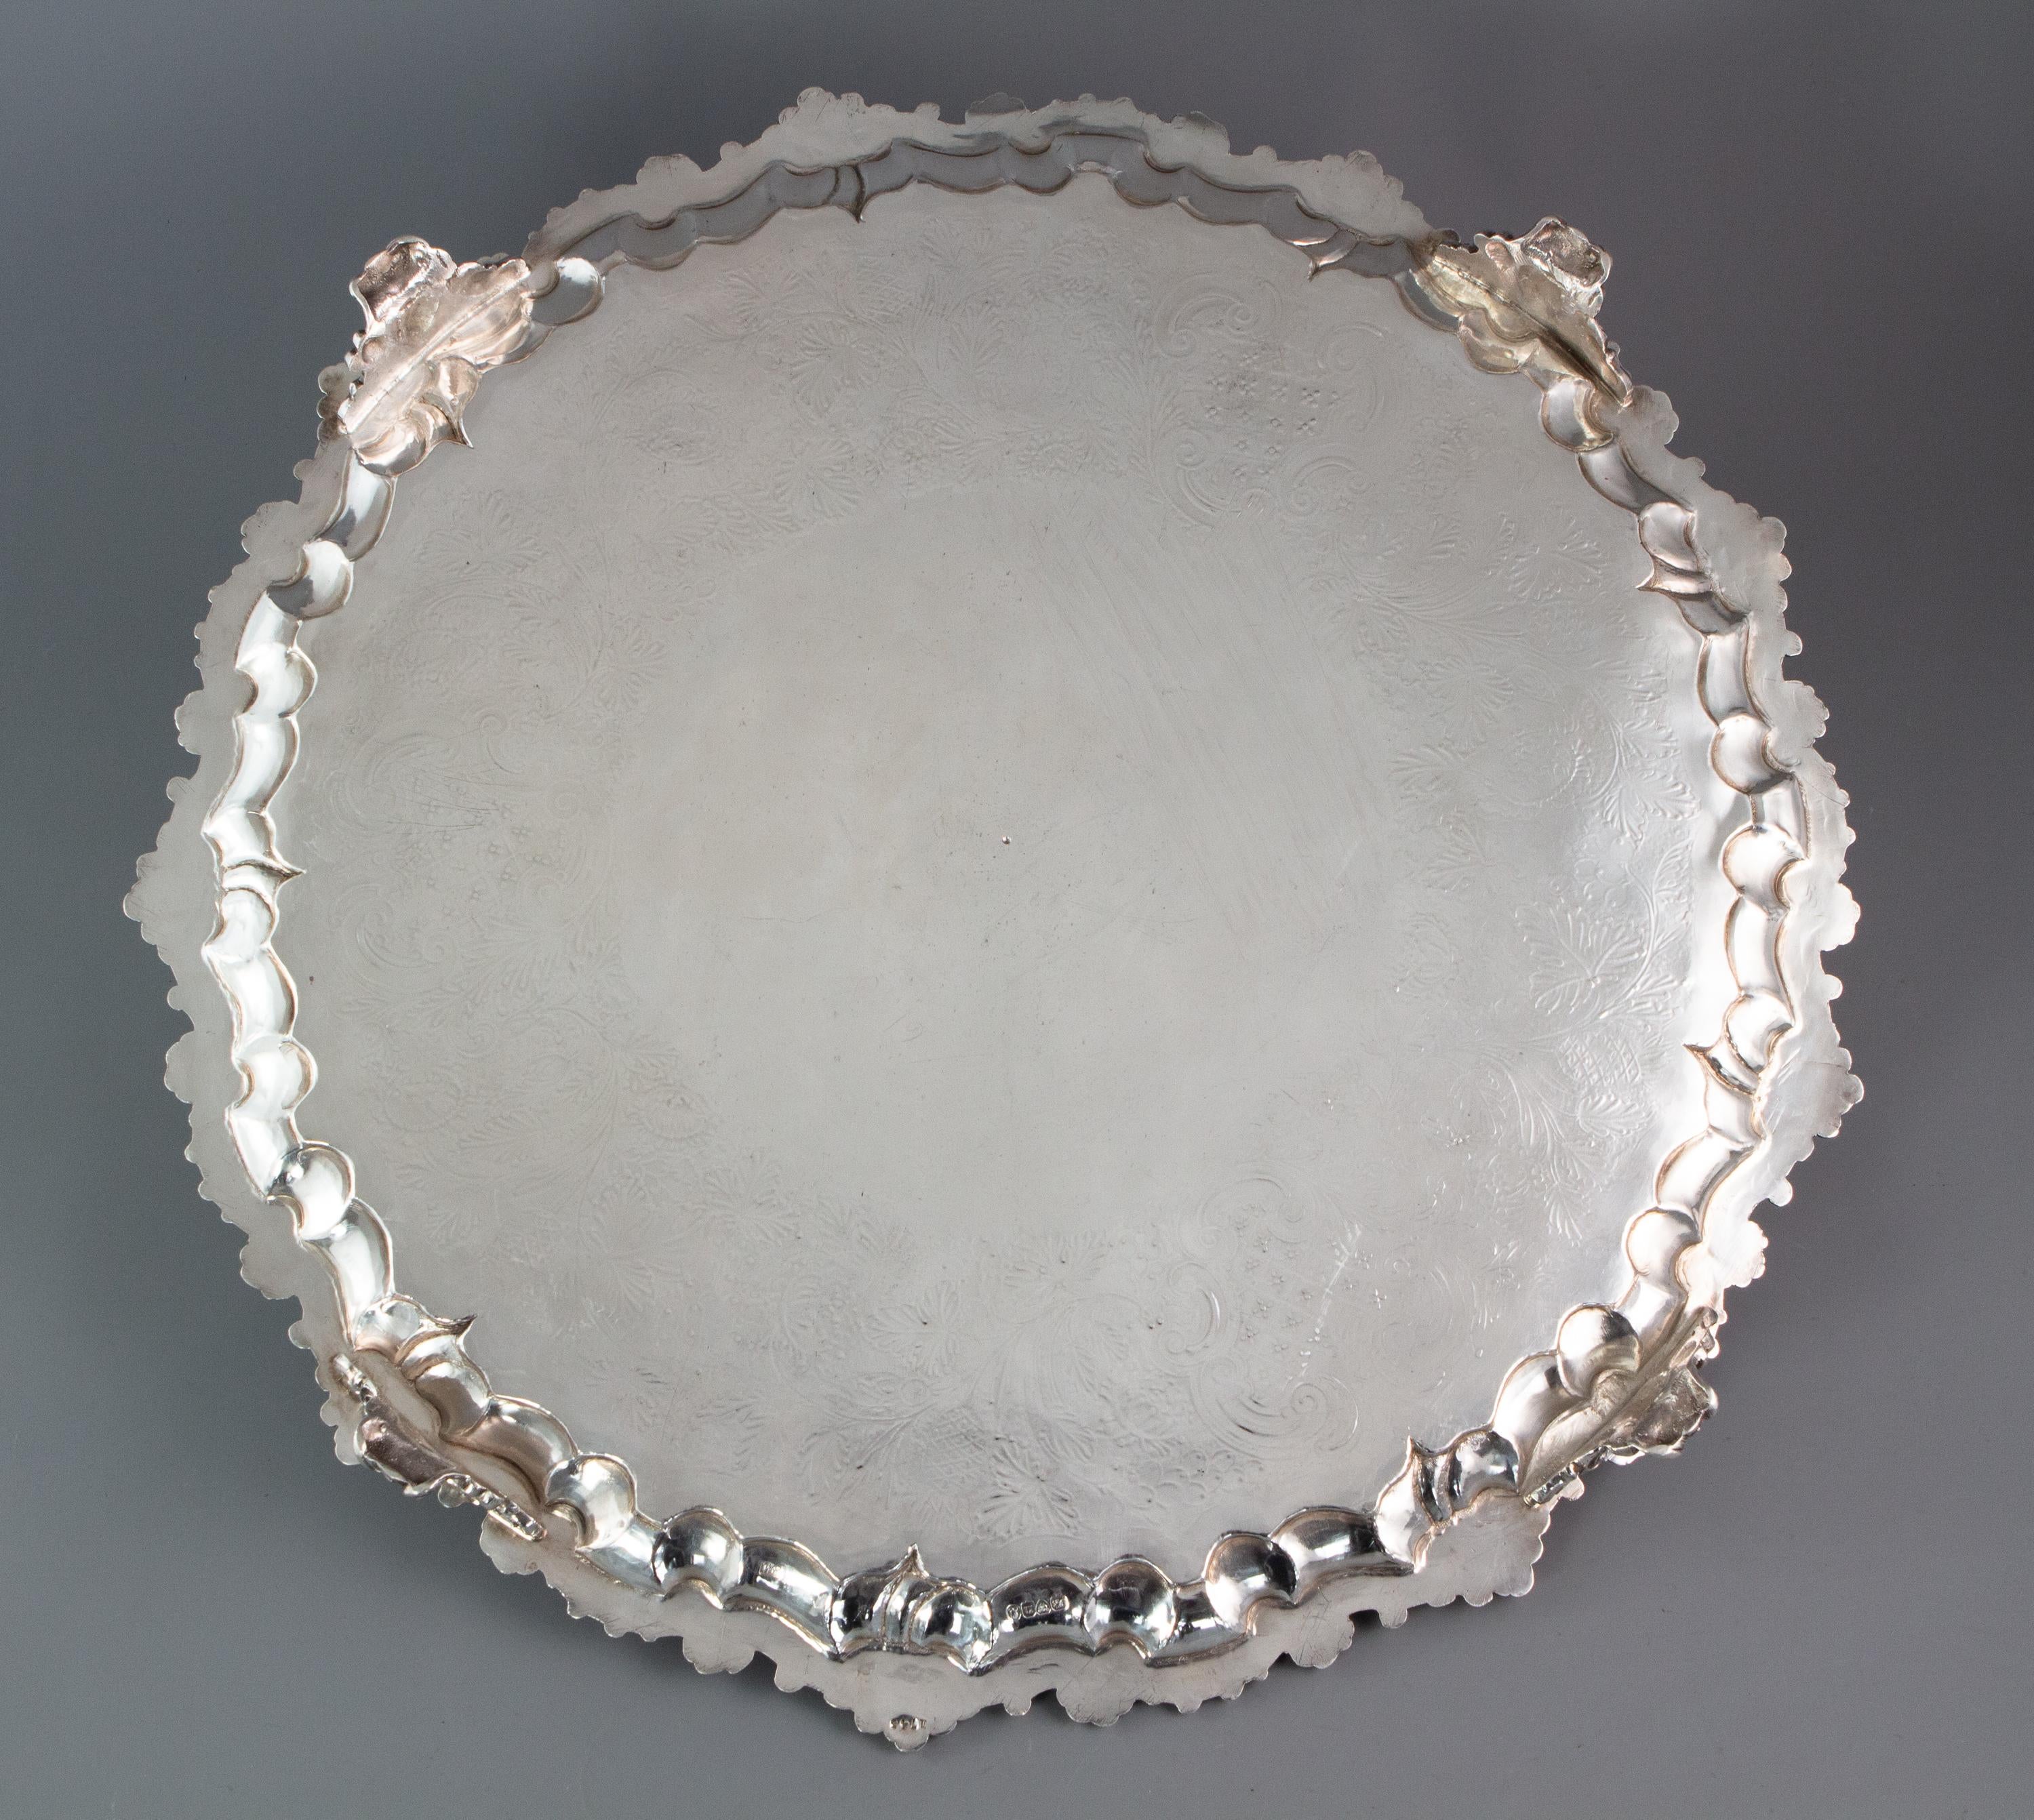 An impressive Georgian silver salver of large proportion. Of circular form with a cast and applied edge decorated with scrolls and shell patterns. The central reserve surrounded by intricately worked ground upon which bright cut flowers, leaves,